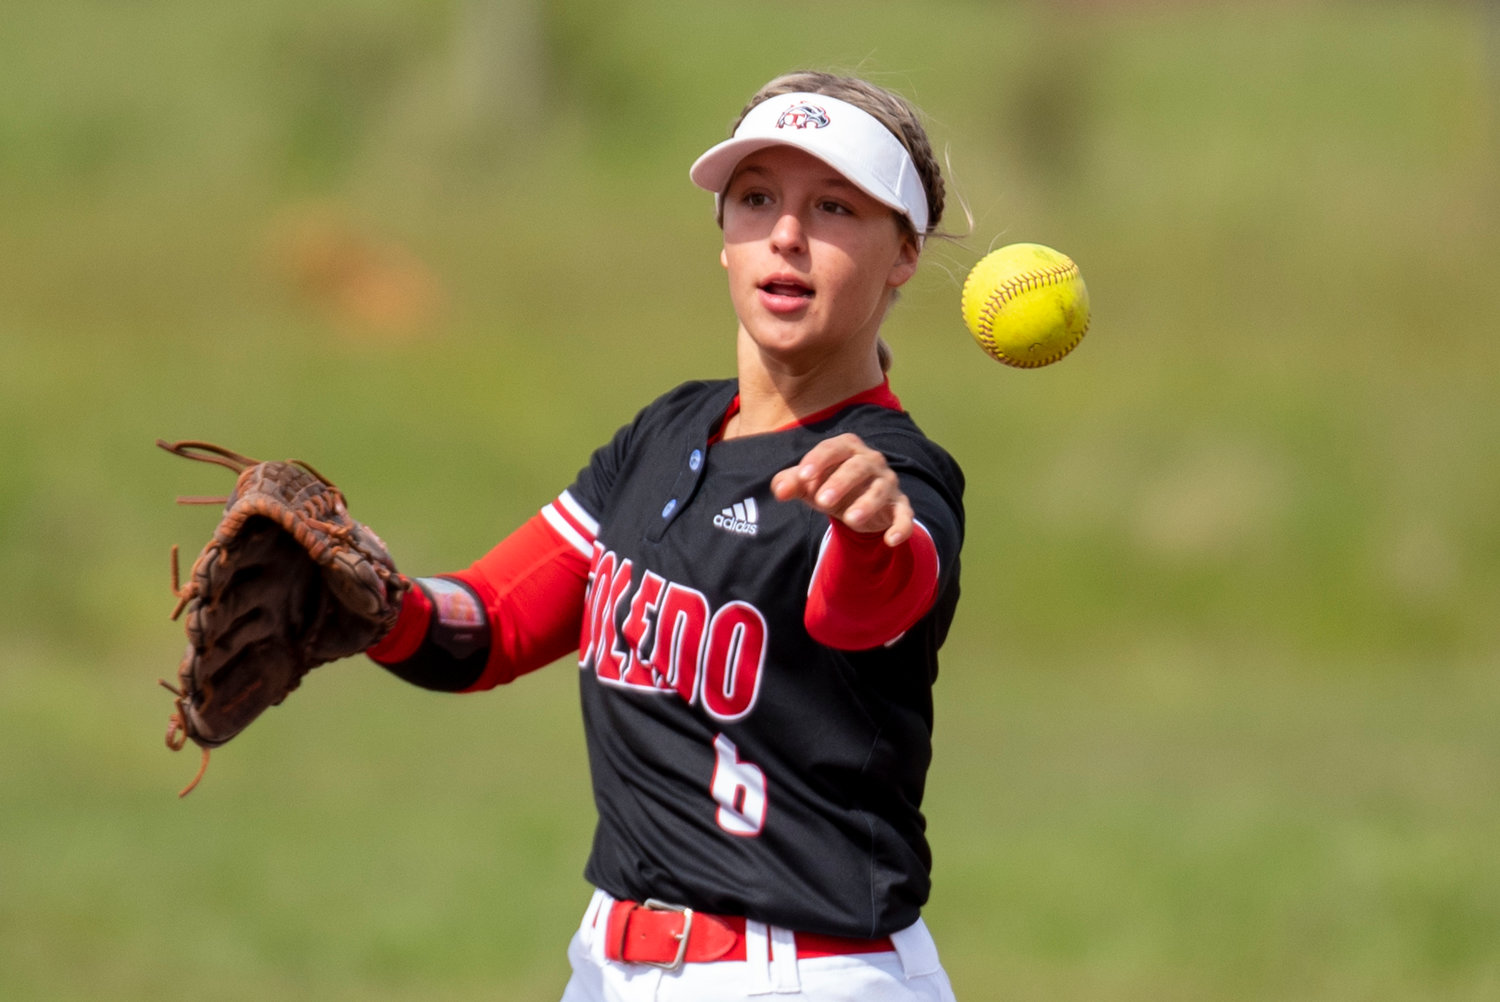 Toledo shortstop Brynn Williams makes a throw to first base during a home game against Rainier on April 25..